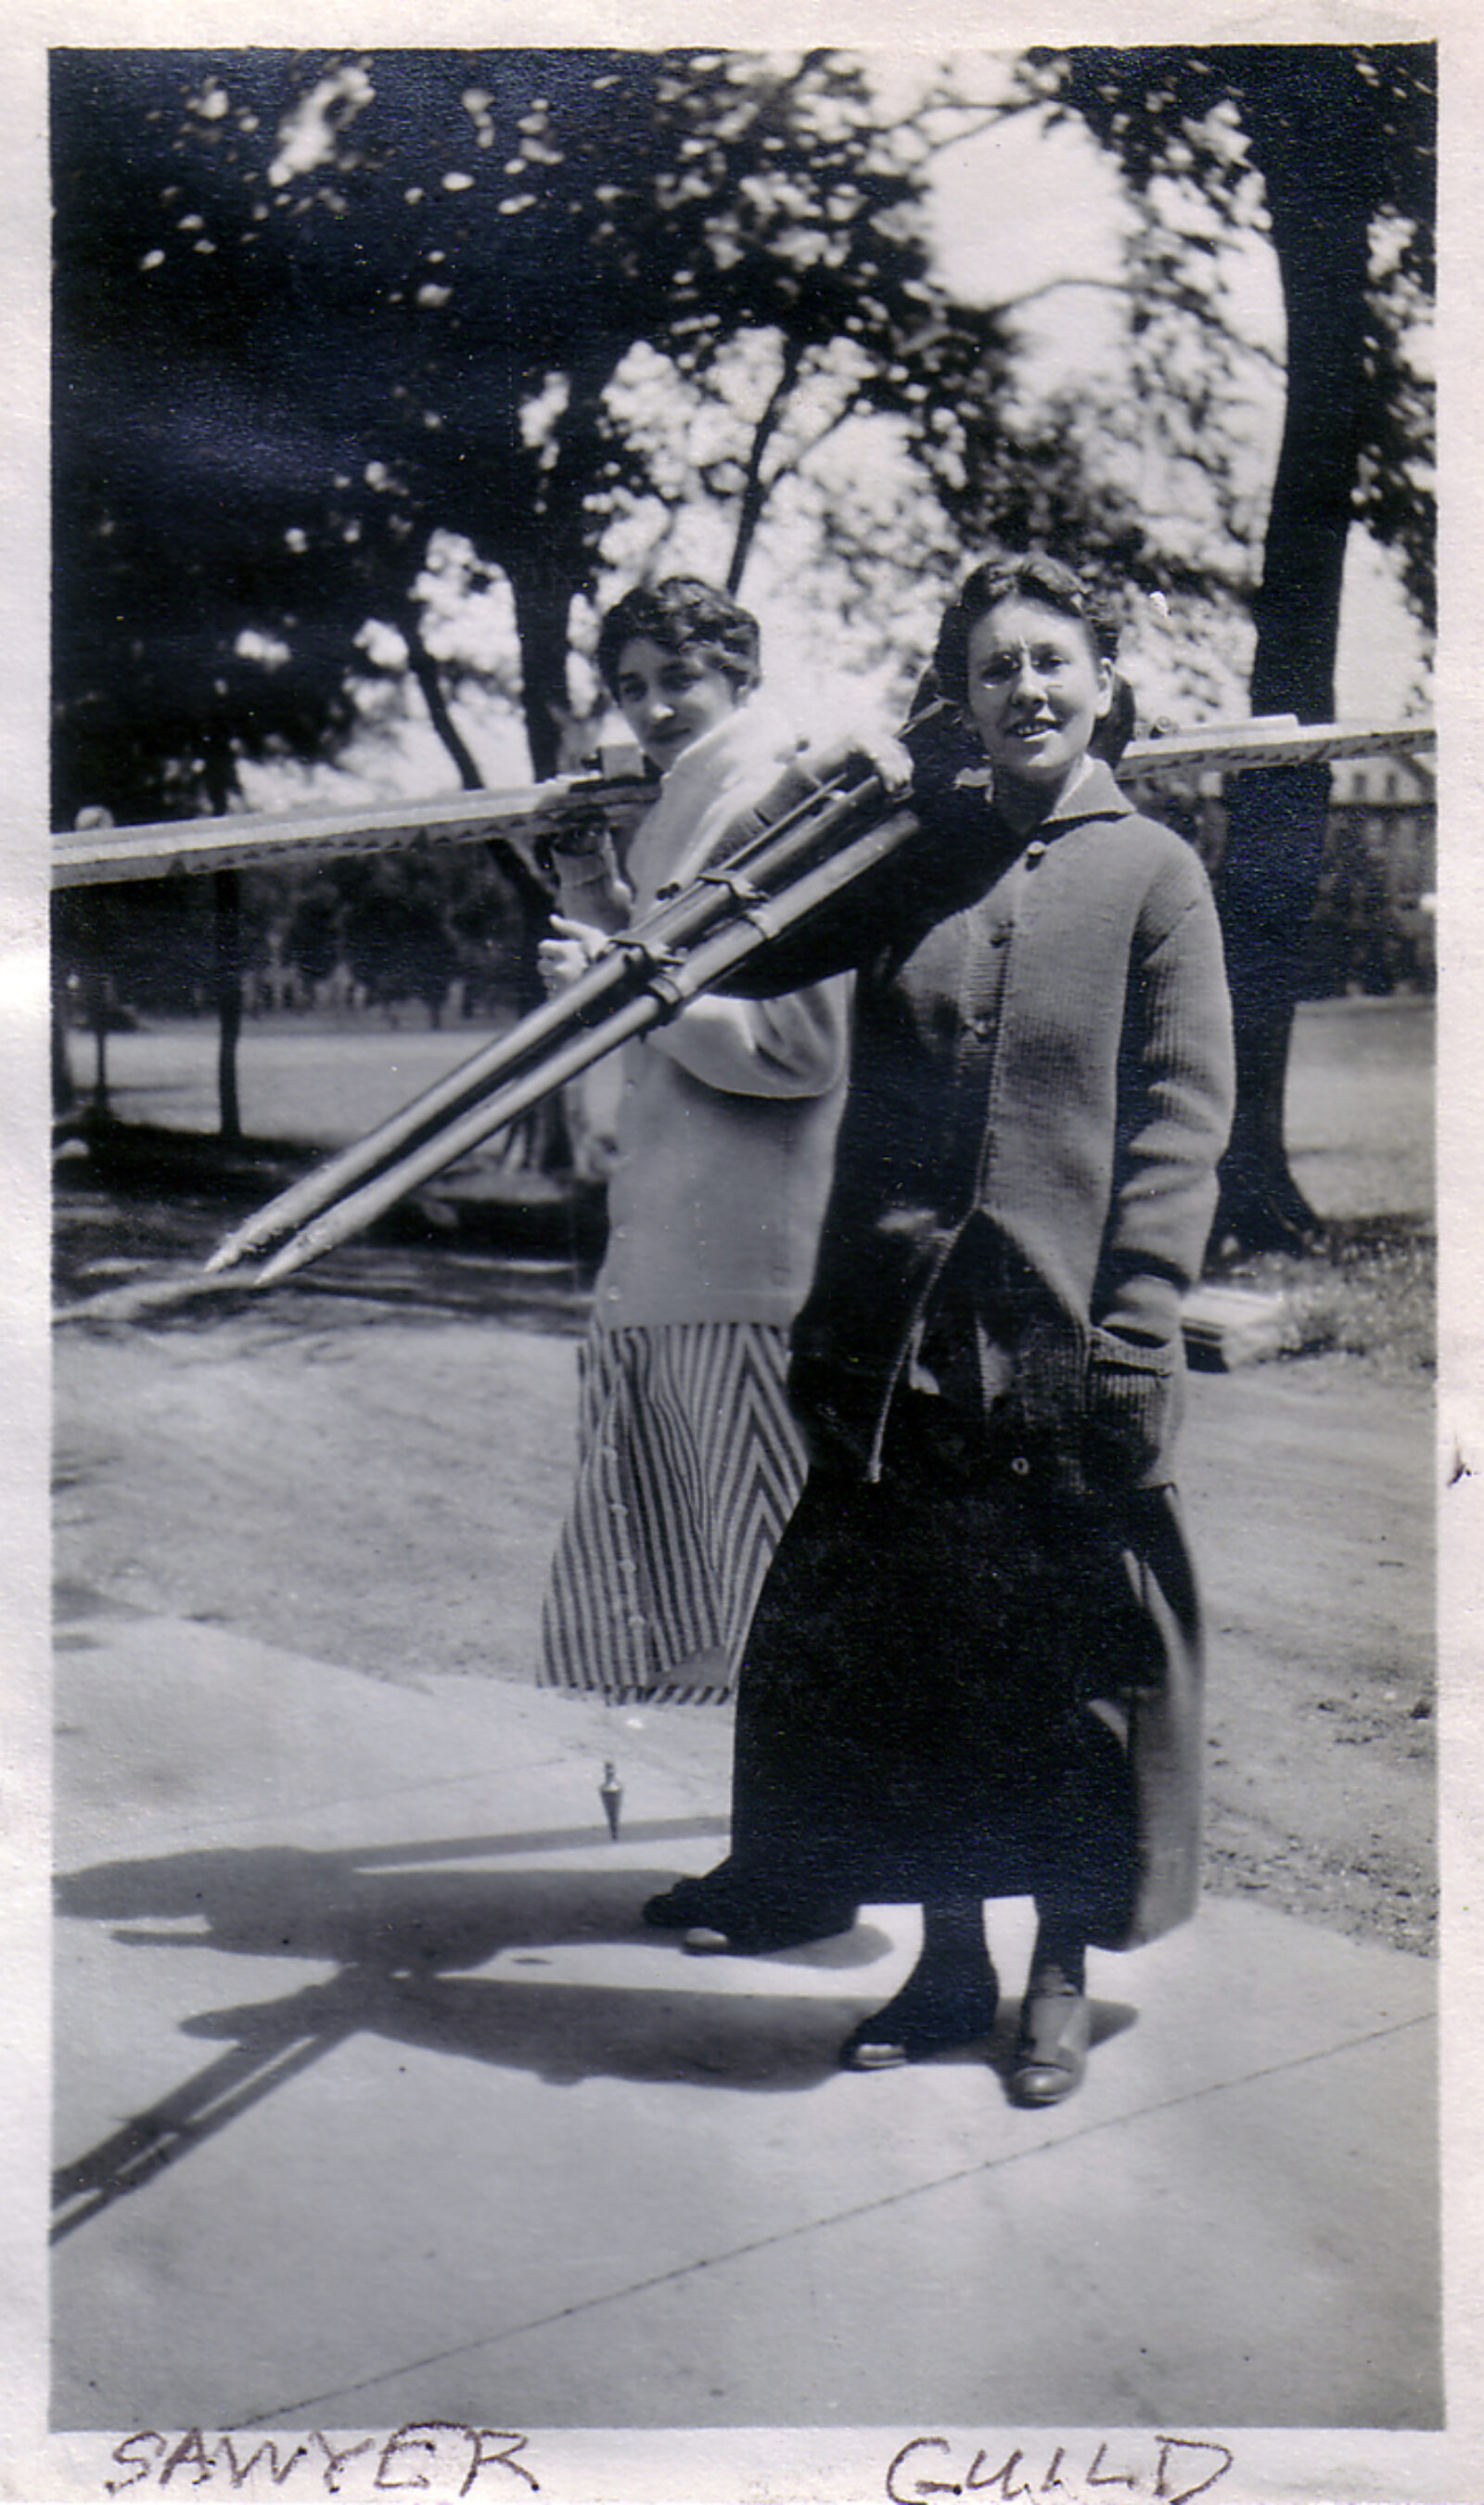 BSLA students Lois Green Guild and Gertrude E. Sawyer in second-year surveying class